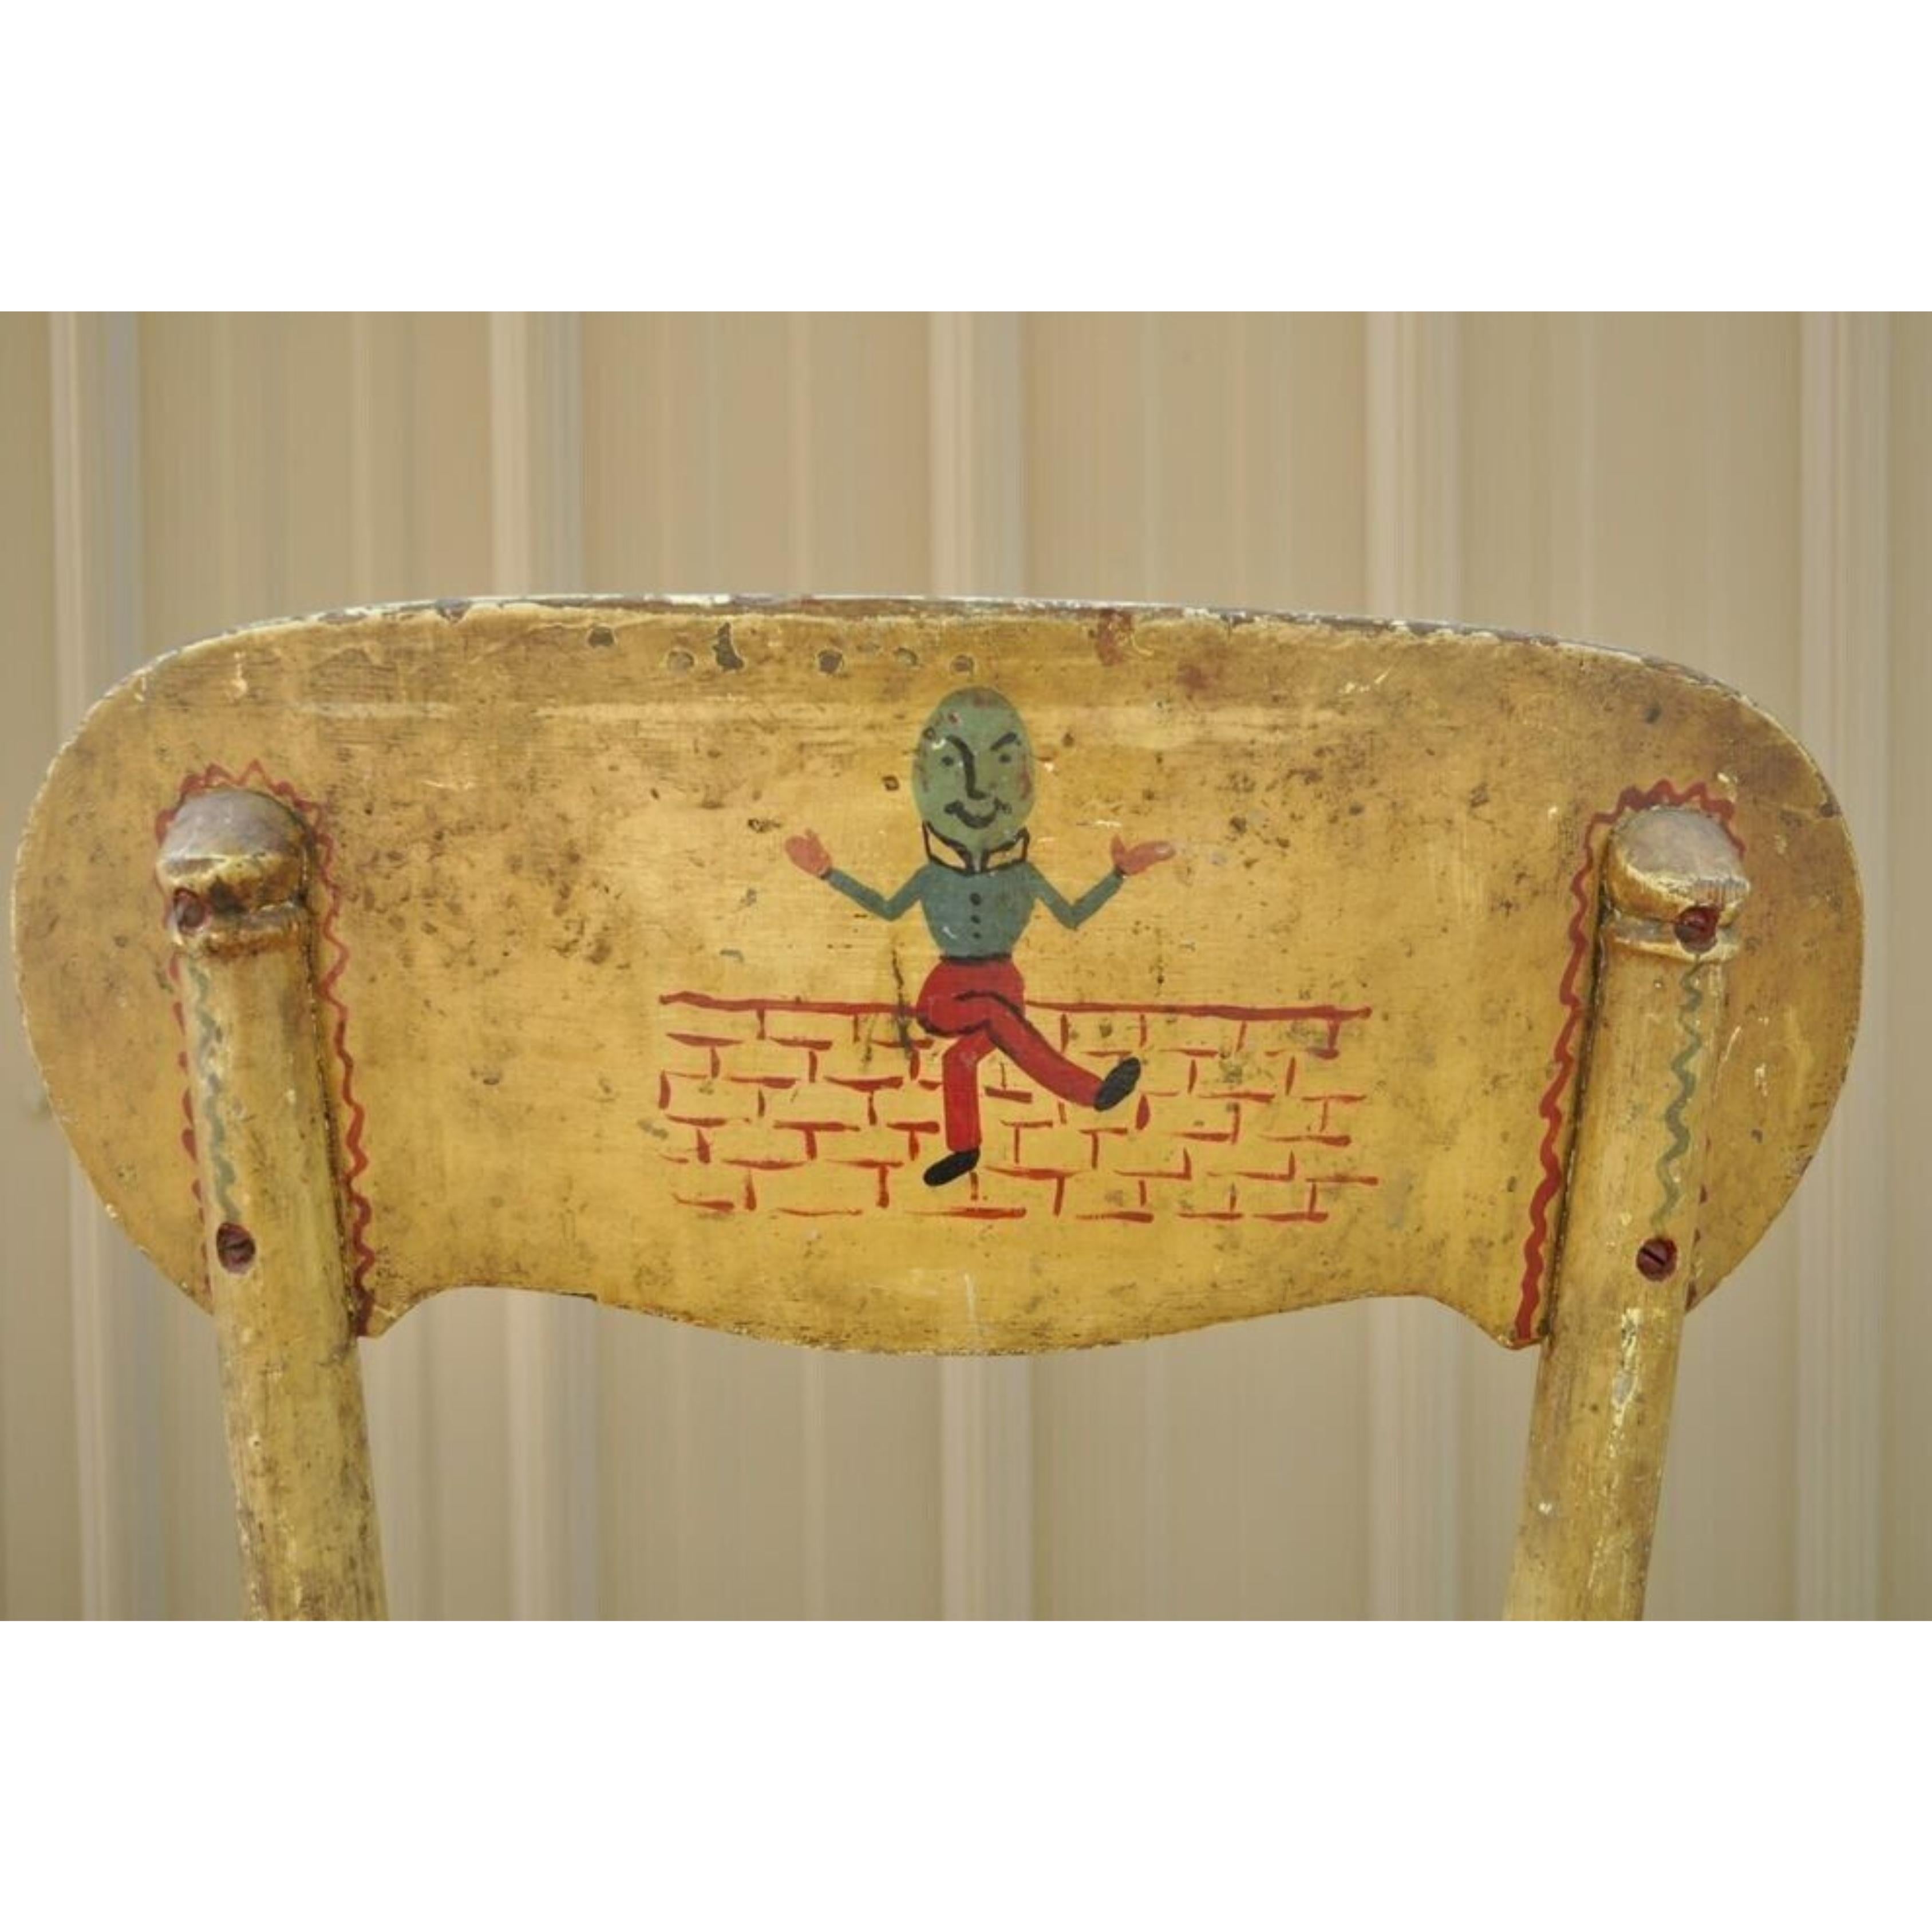 Antique Rustic Primitive Distress Hand Painted Nursery Rhymes Side Accent Chair For Sale 4